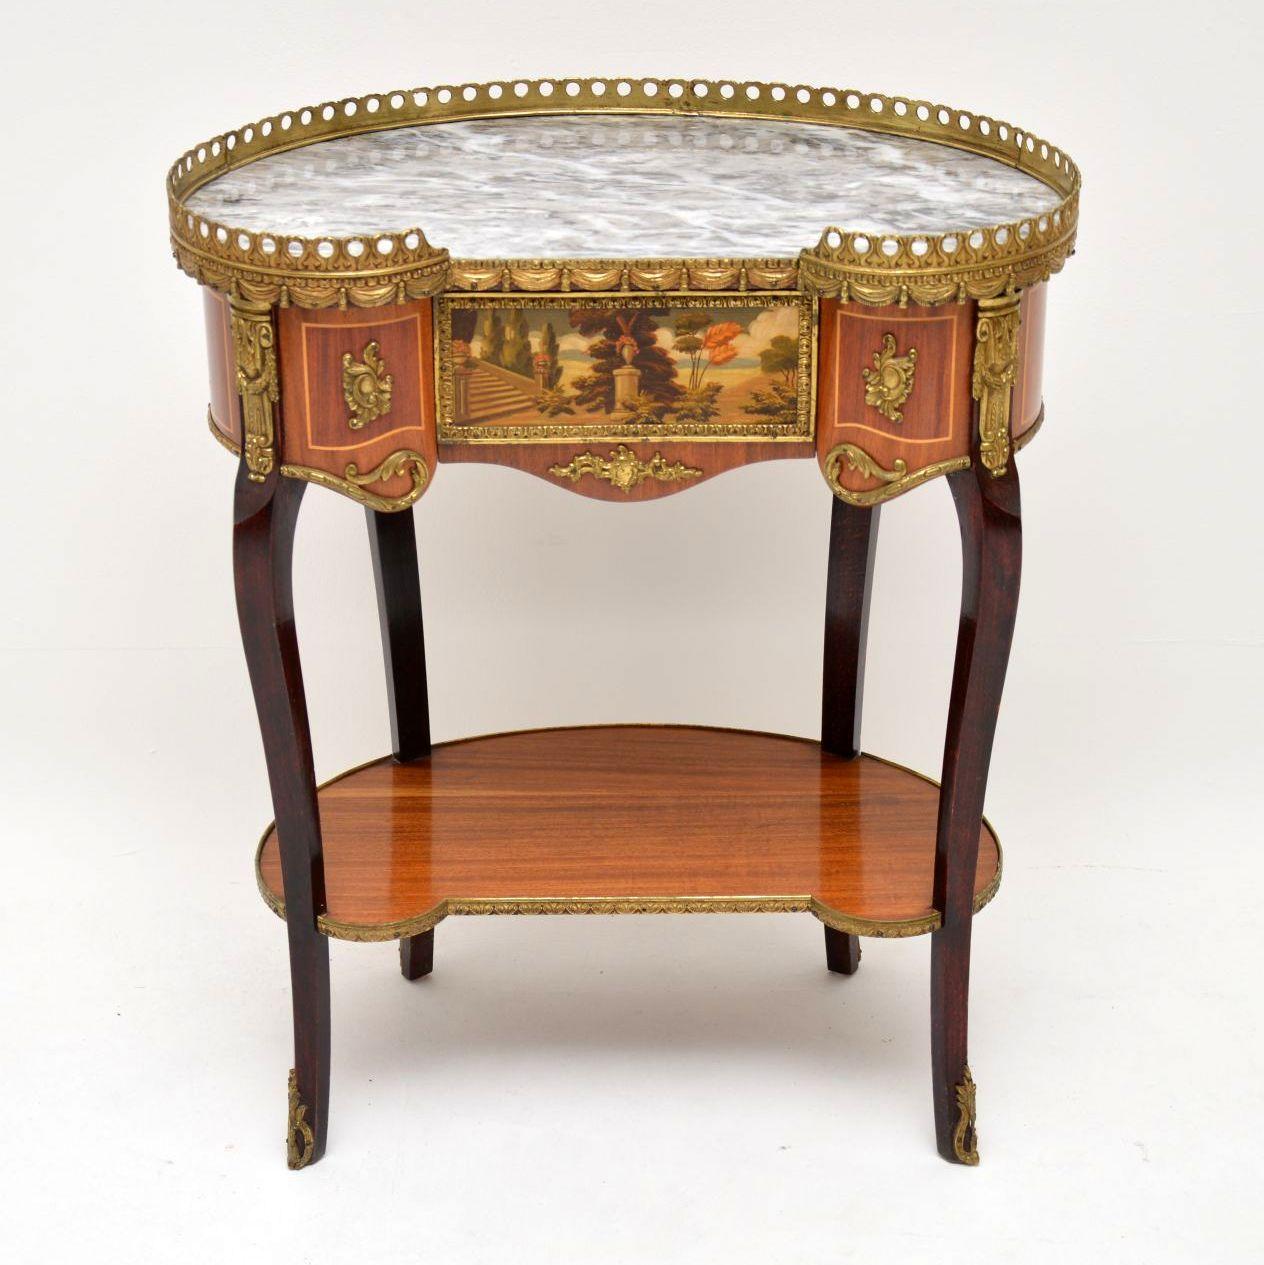 Antique French marble-top kidney shaped side table in good condition & with some fine details. The top has a pierced gilt metal gallery with swag decoration & there are many gilt bronze mounts with classical decorations all-over this table. There’s